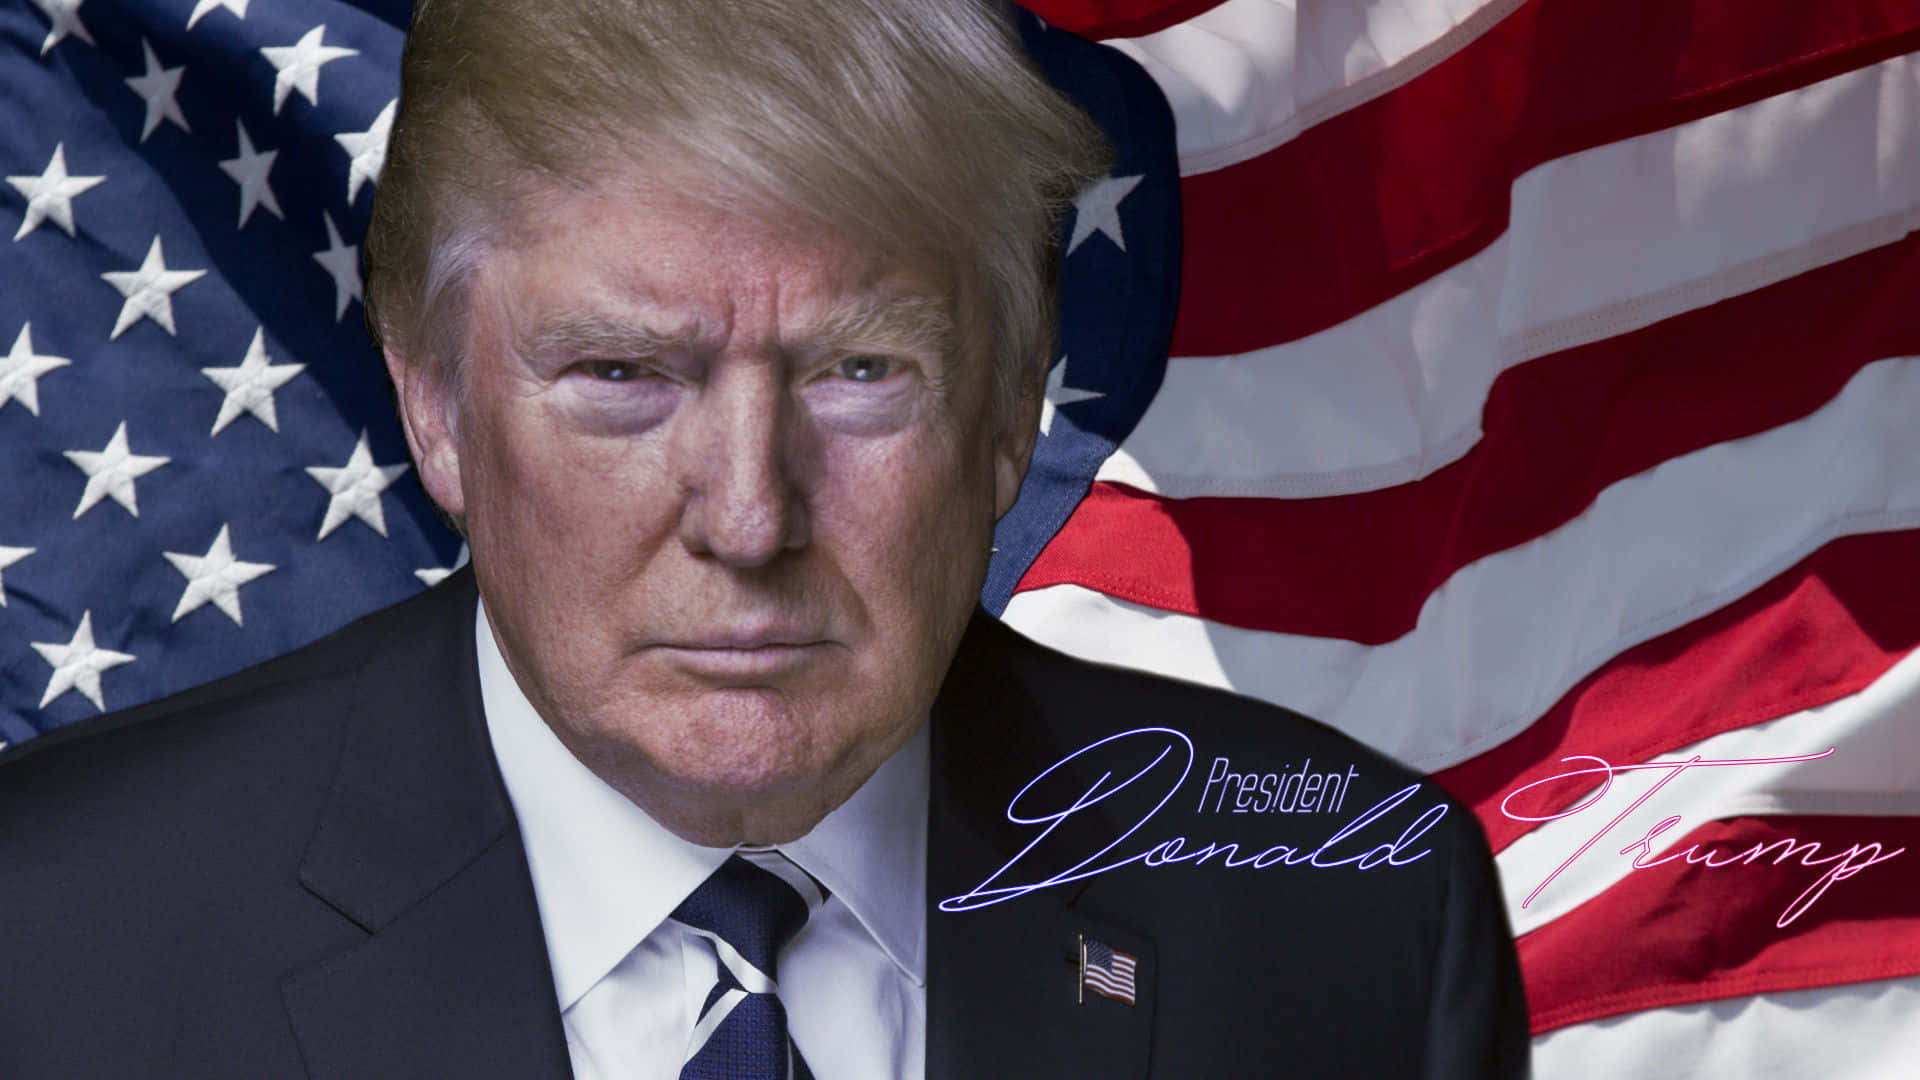 Donald Trump in a portrait with an American flag backdrop